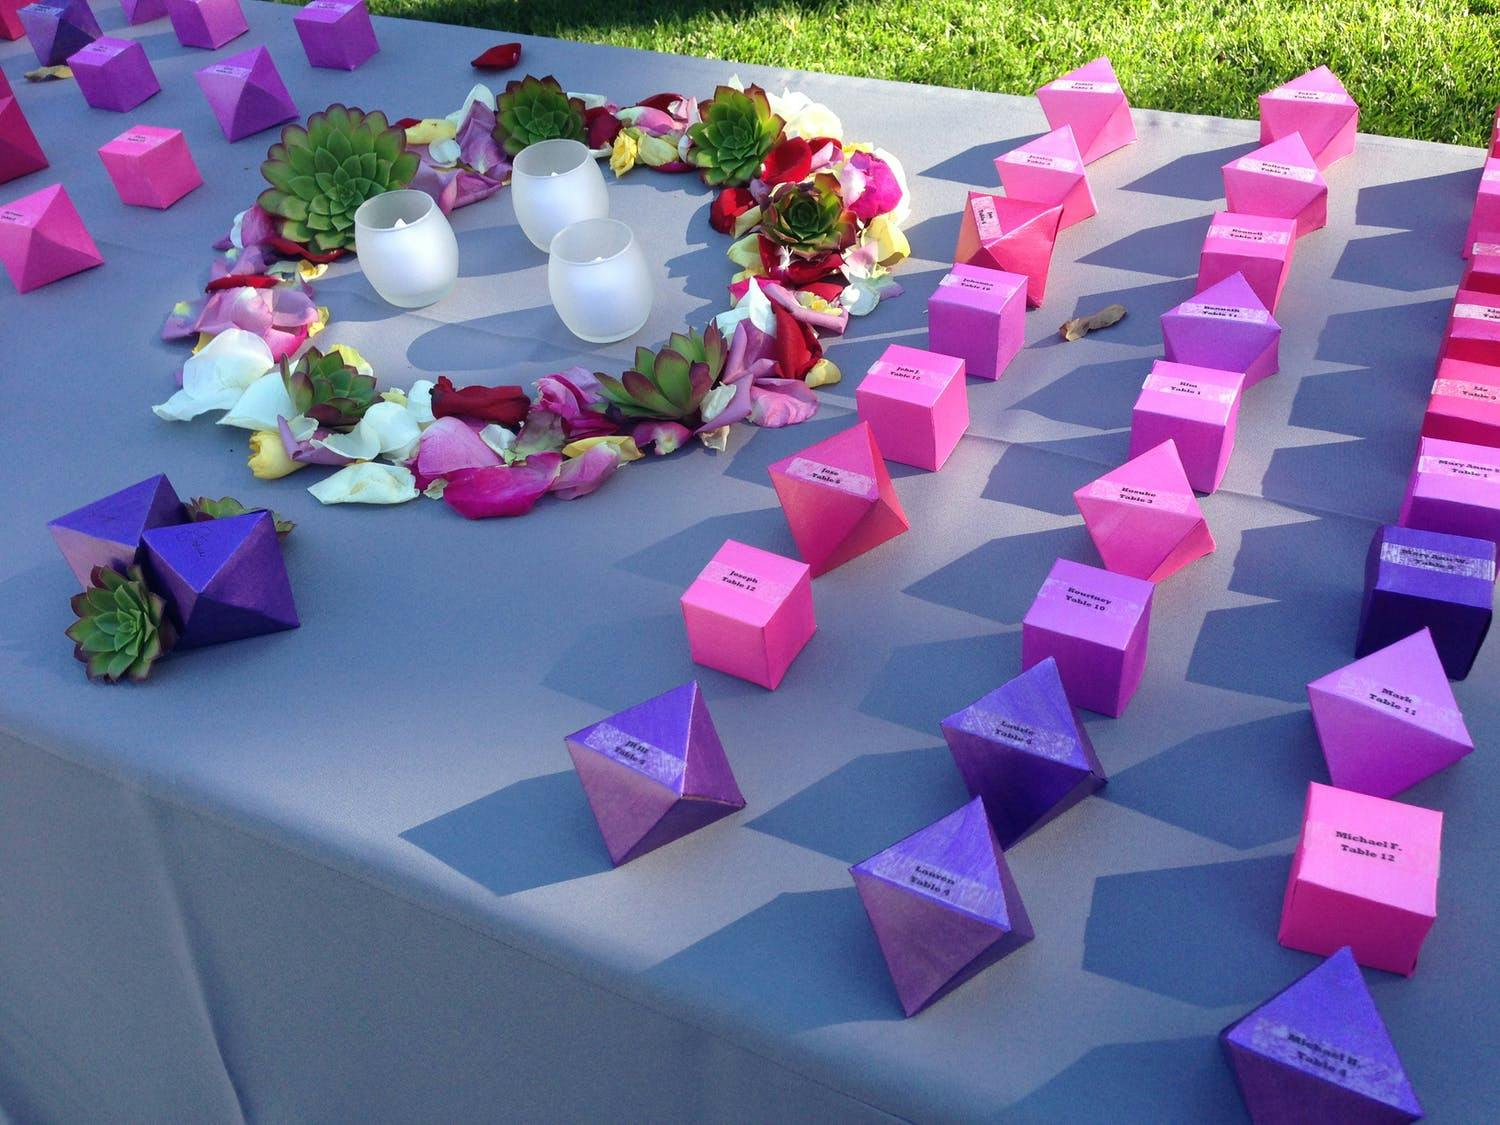 Garden wedding with pink and purple geometric origami wedding escort cards | PartySlate